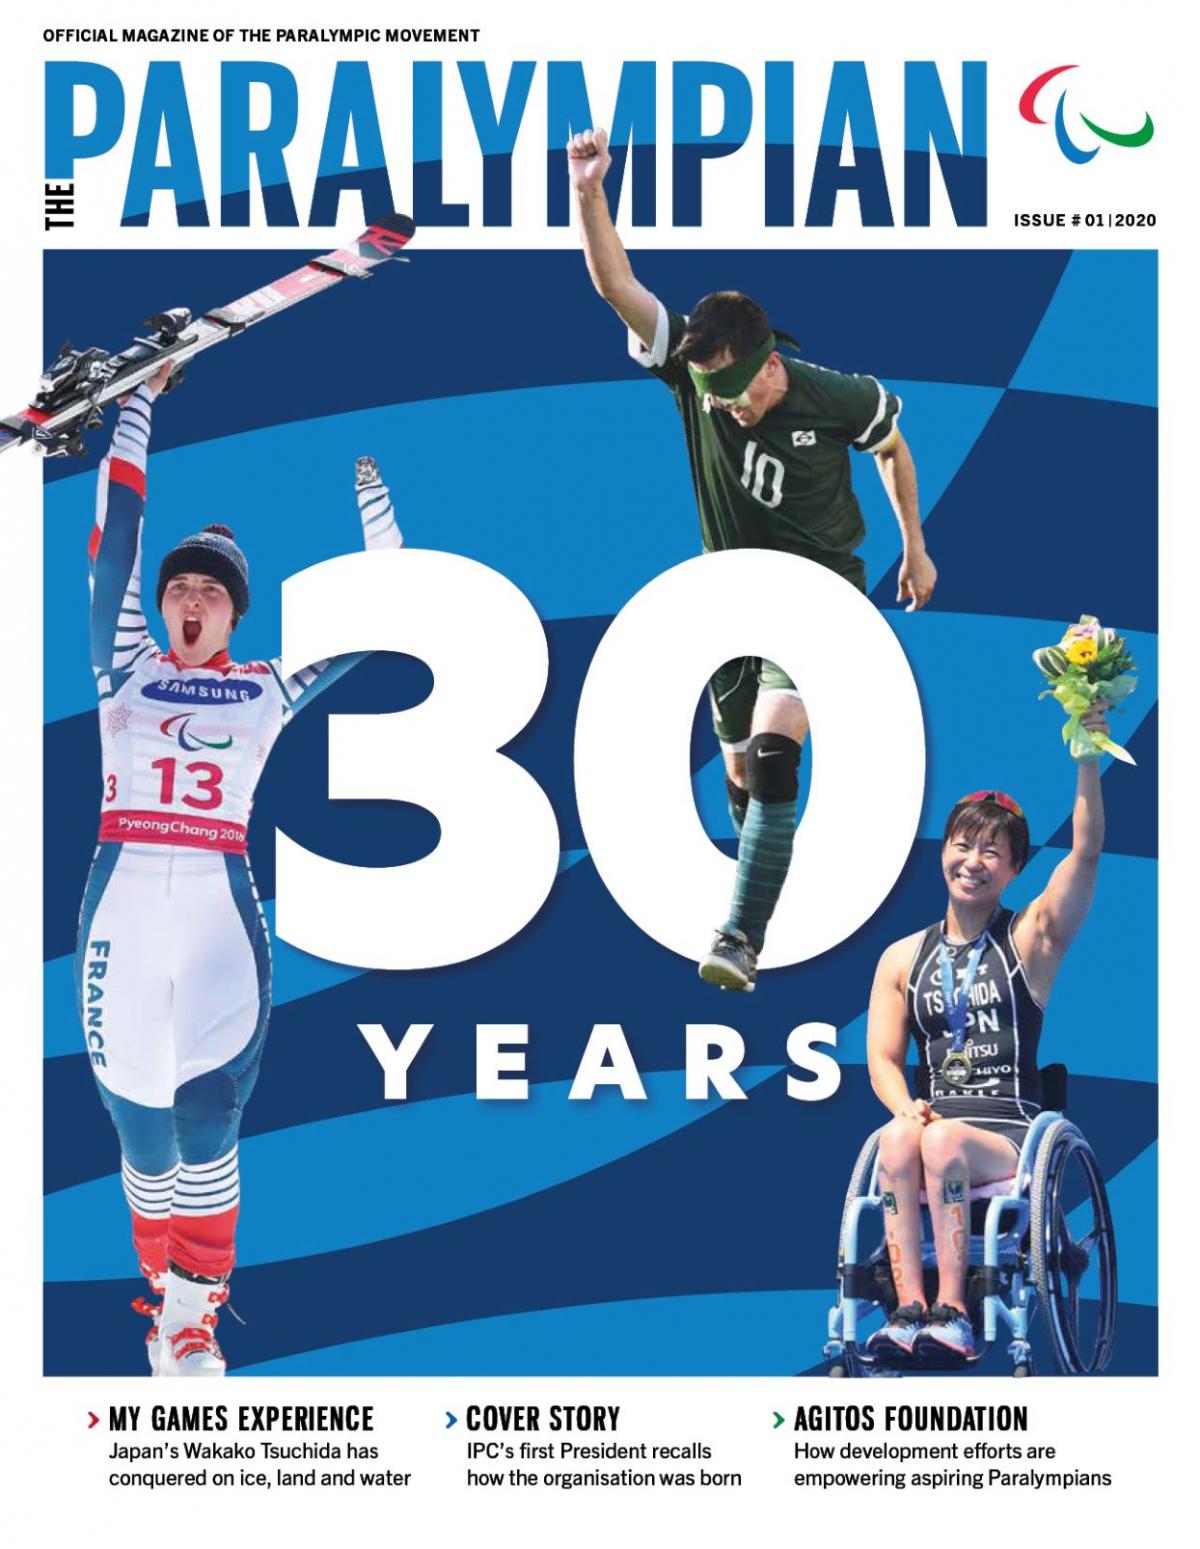 Cover page of IPC magazine with three athletes celebrating around the number 30 to signify IPC's anniversary